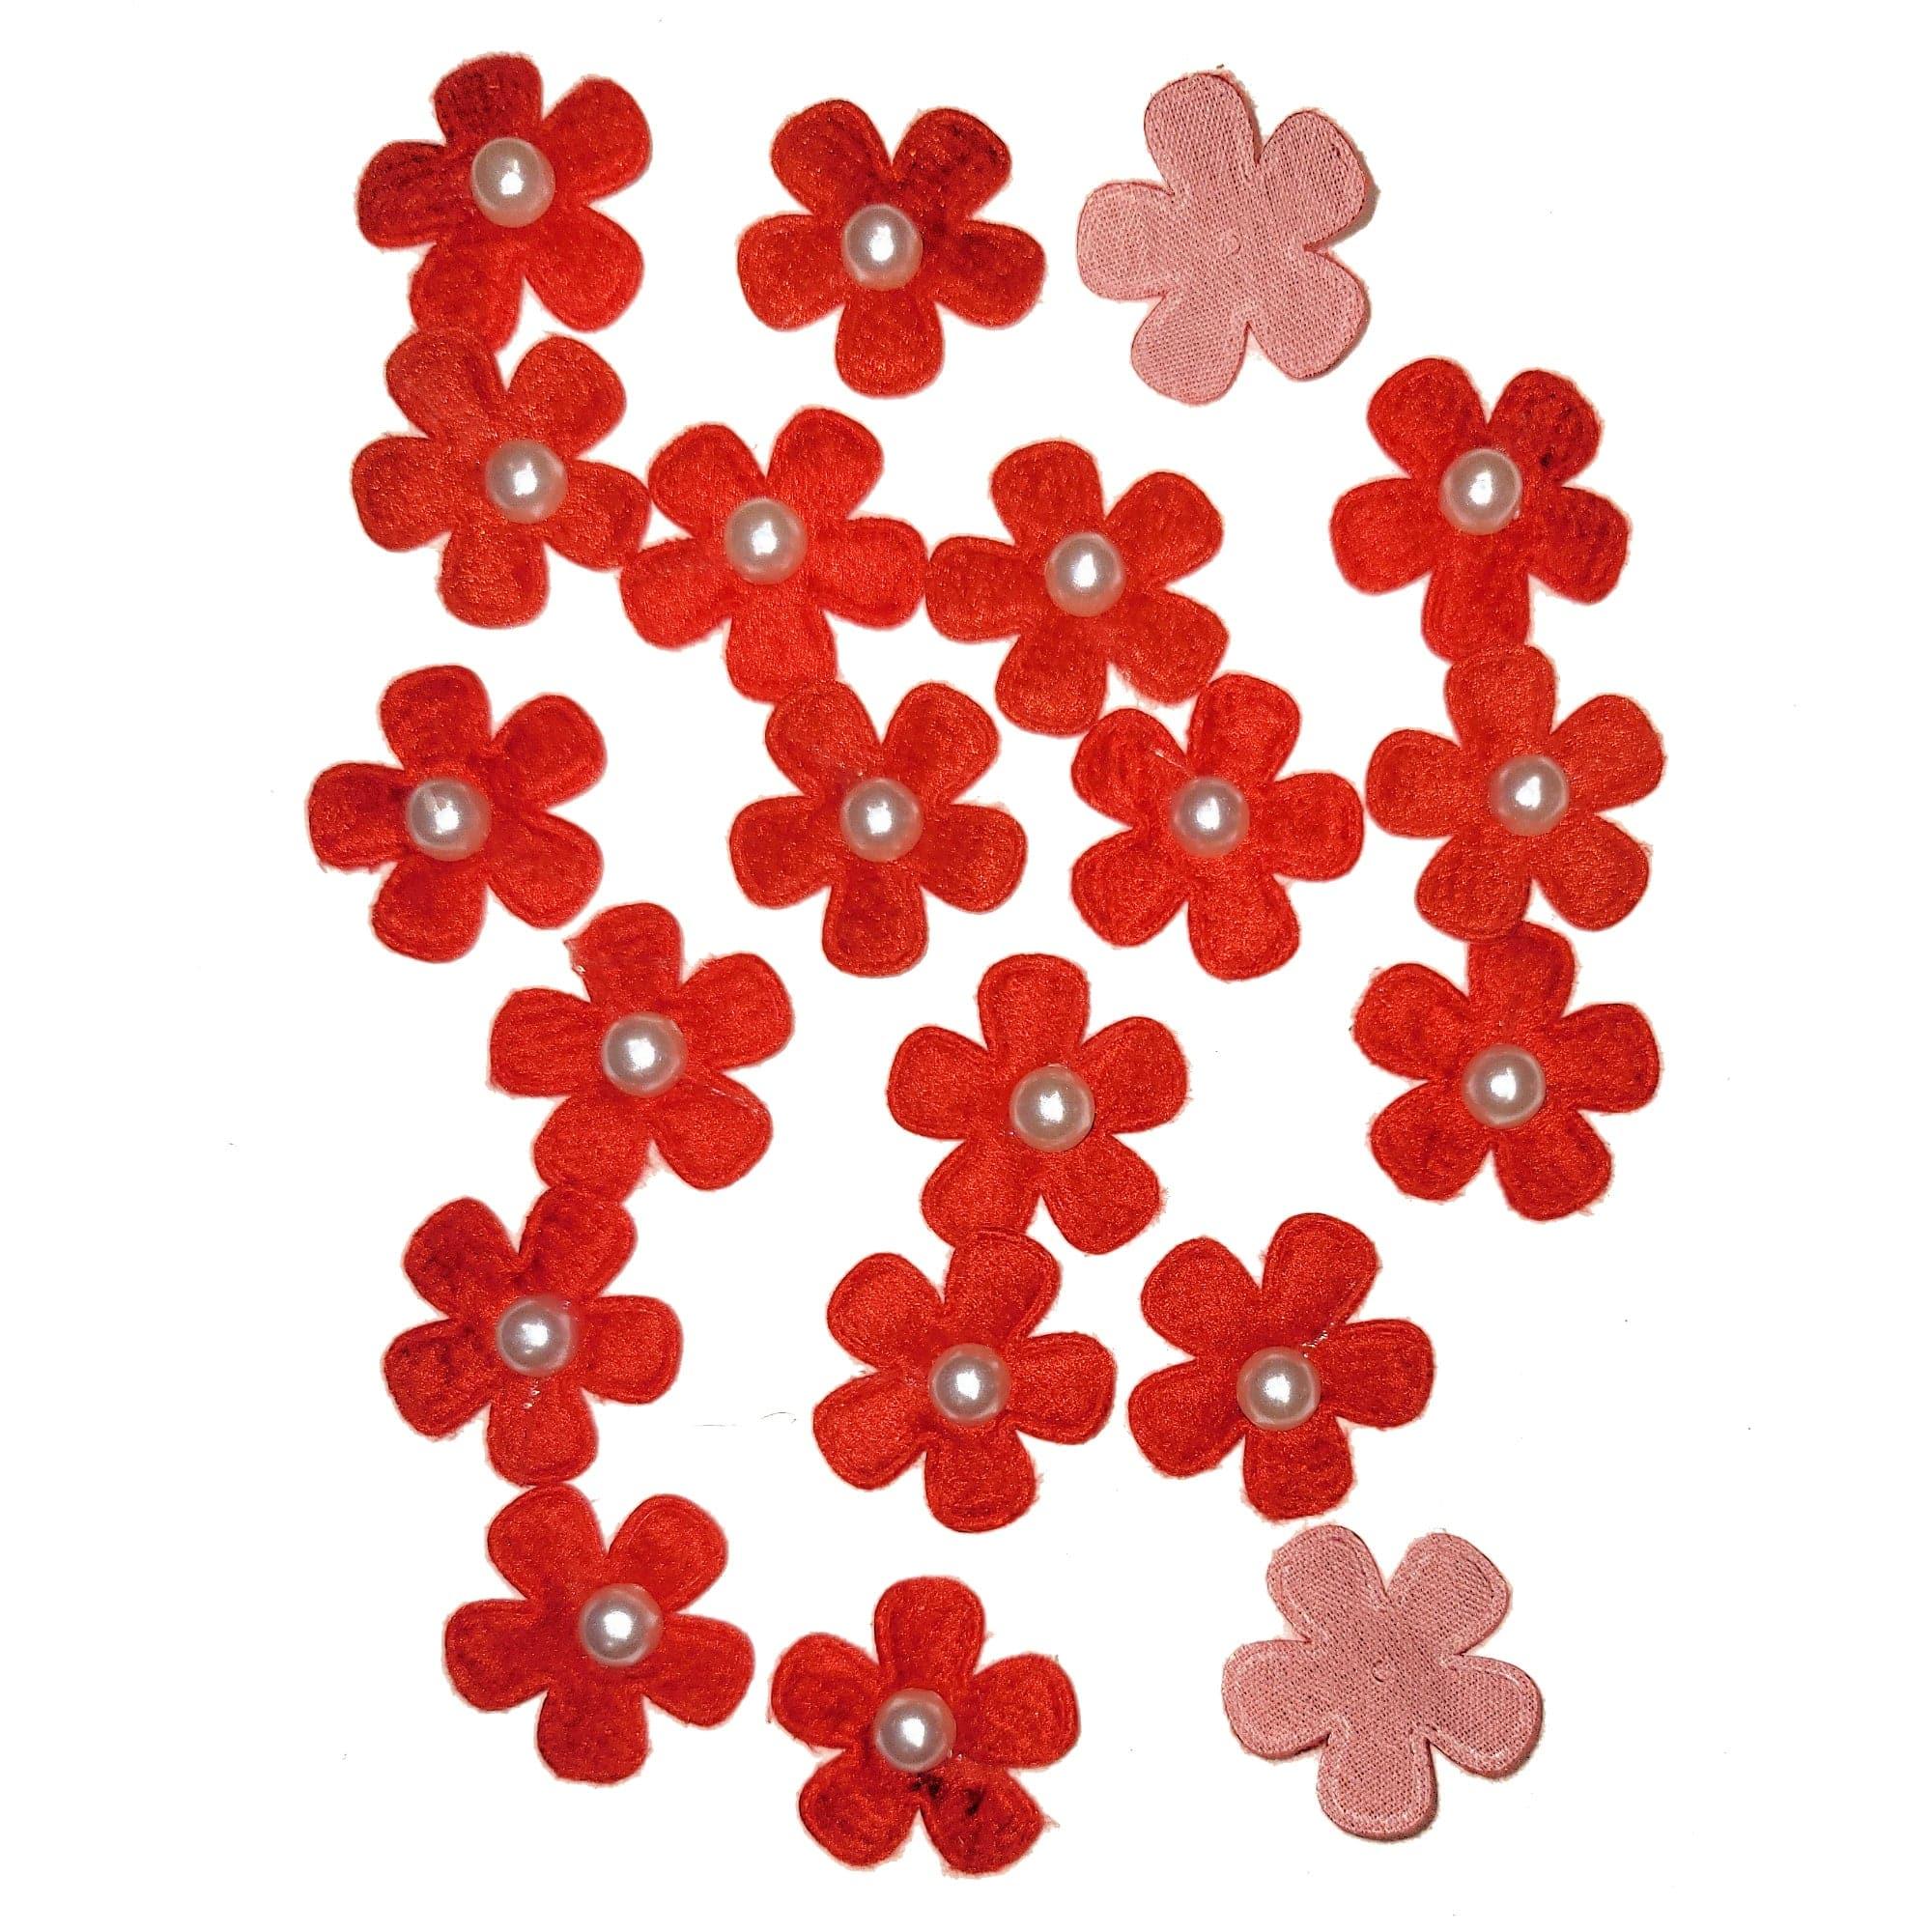 Pearl Petals Collection Red 1" Fabric Flowers with Pearl - Pkg. of 20